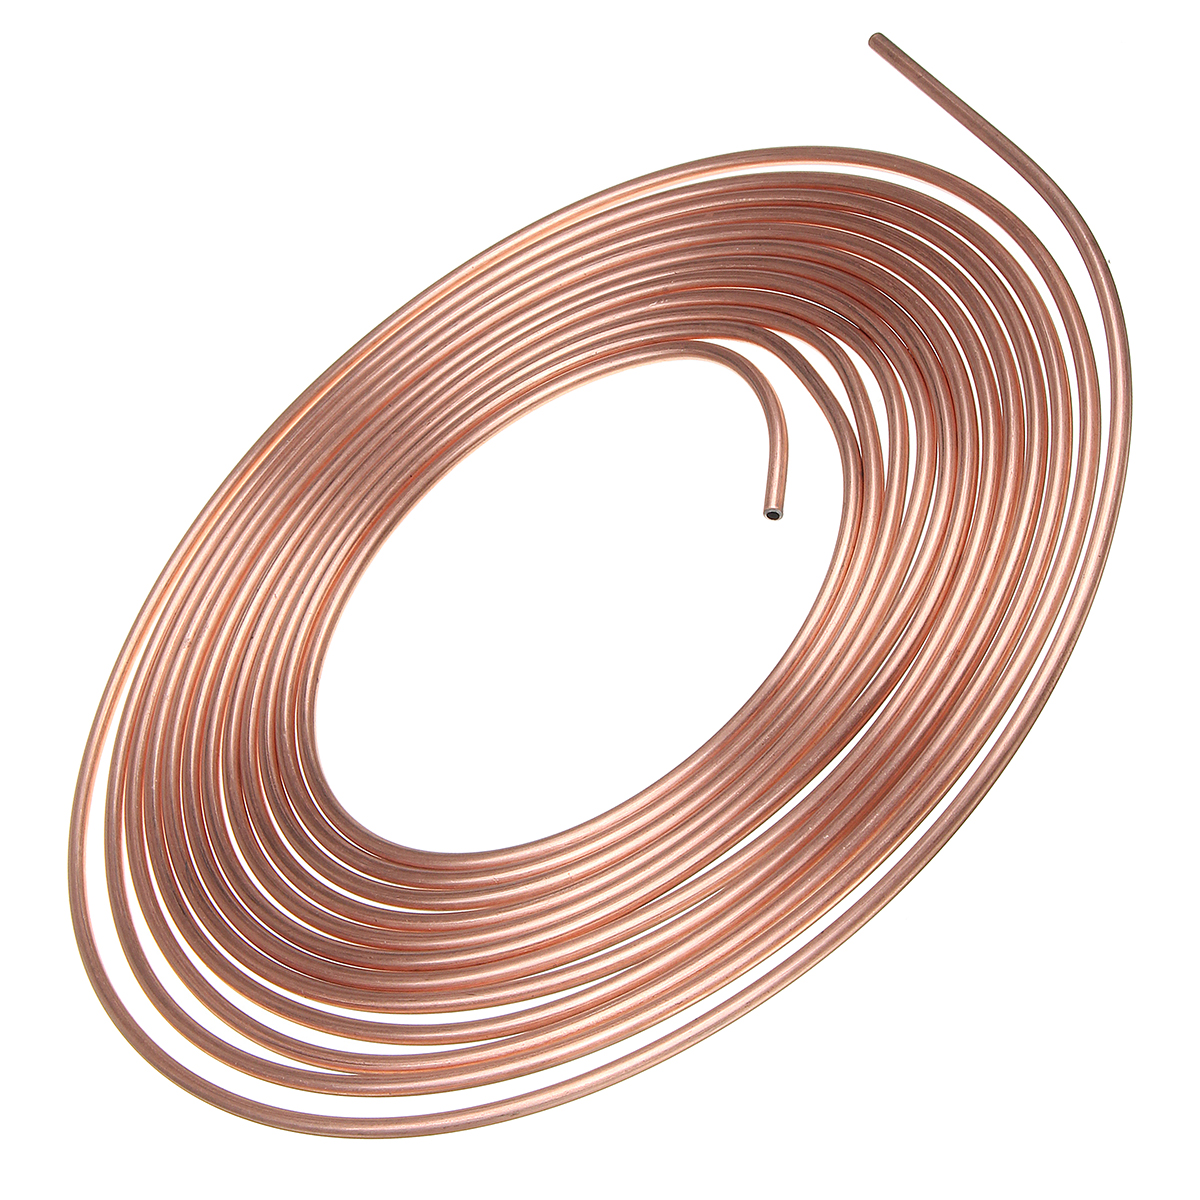 Roll-Copper-Steel-25-ft-316quot-Brake-Line-Pipe-Tubing-with-20-Pcs-Kit-Fittings-Brake-Female-Male-Nu-1543212